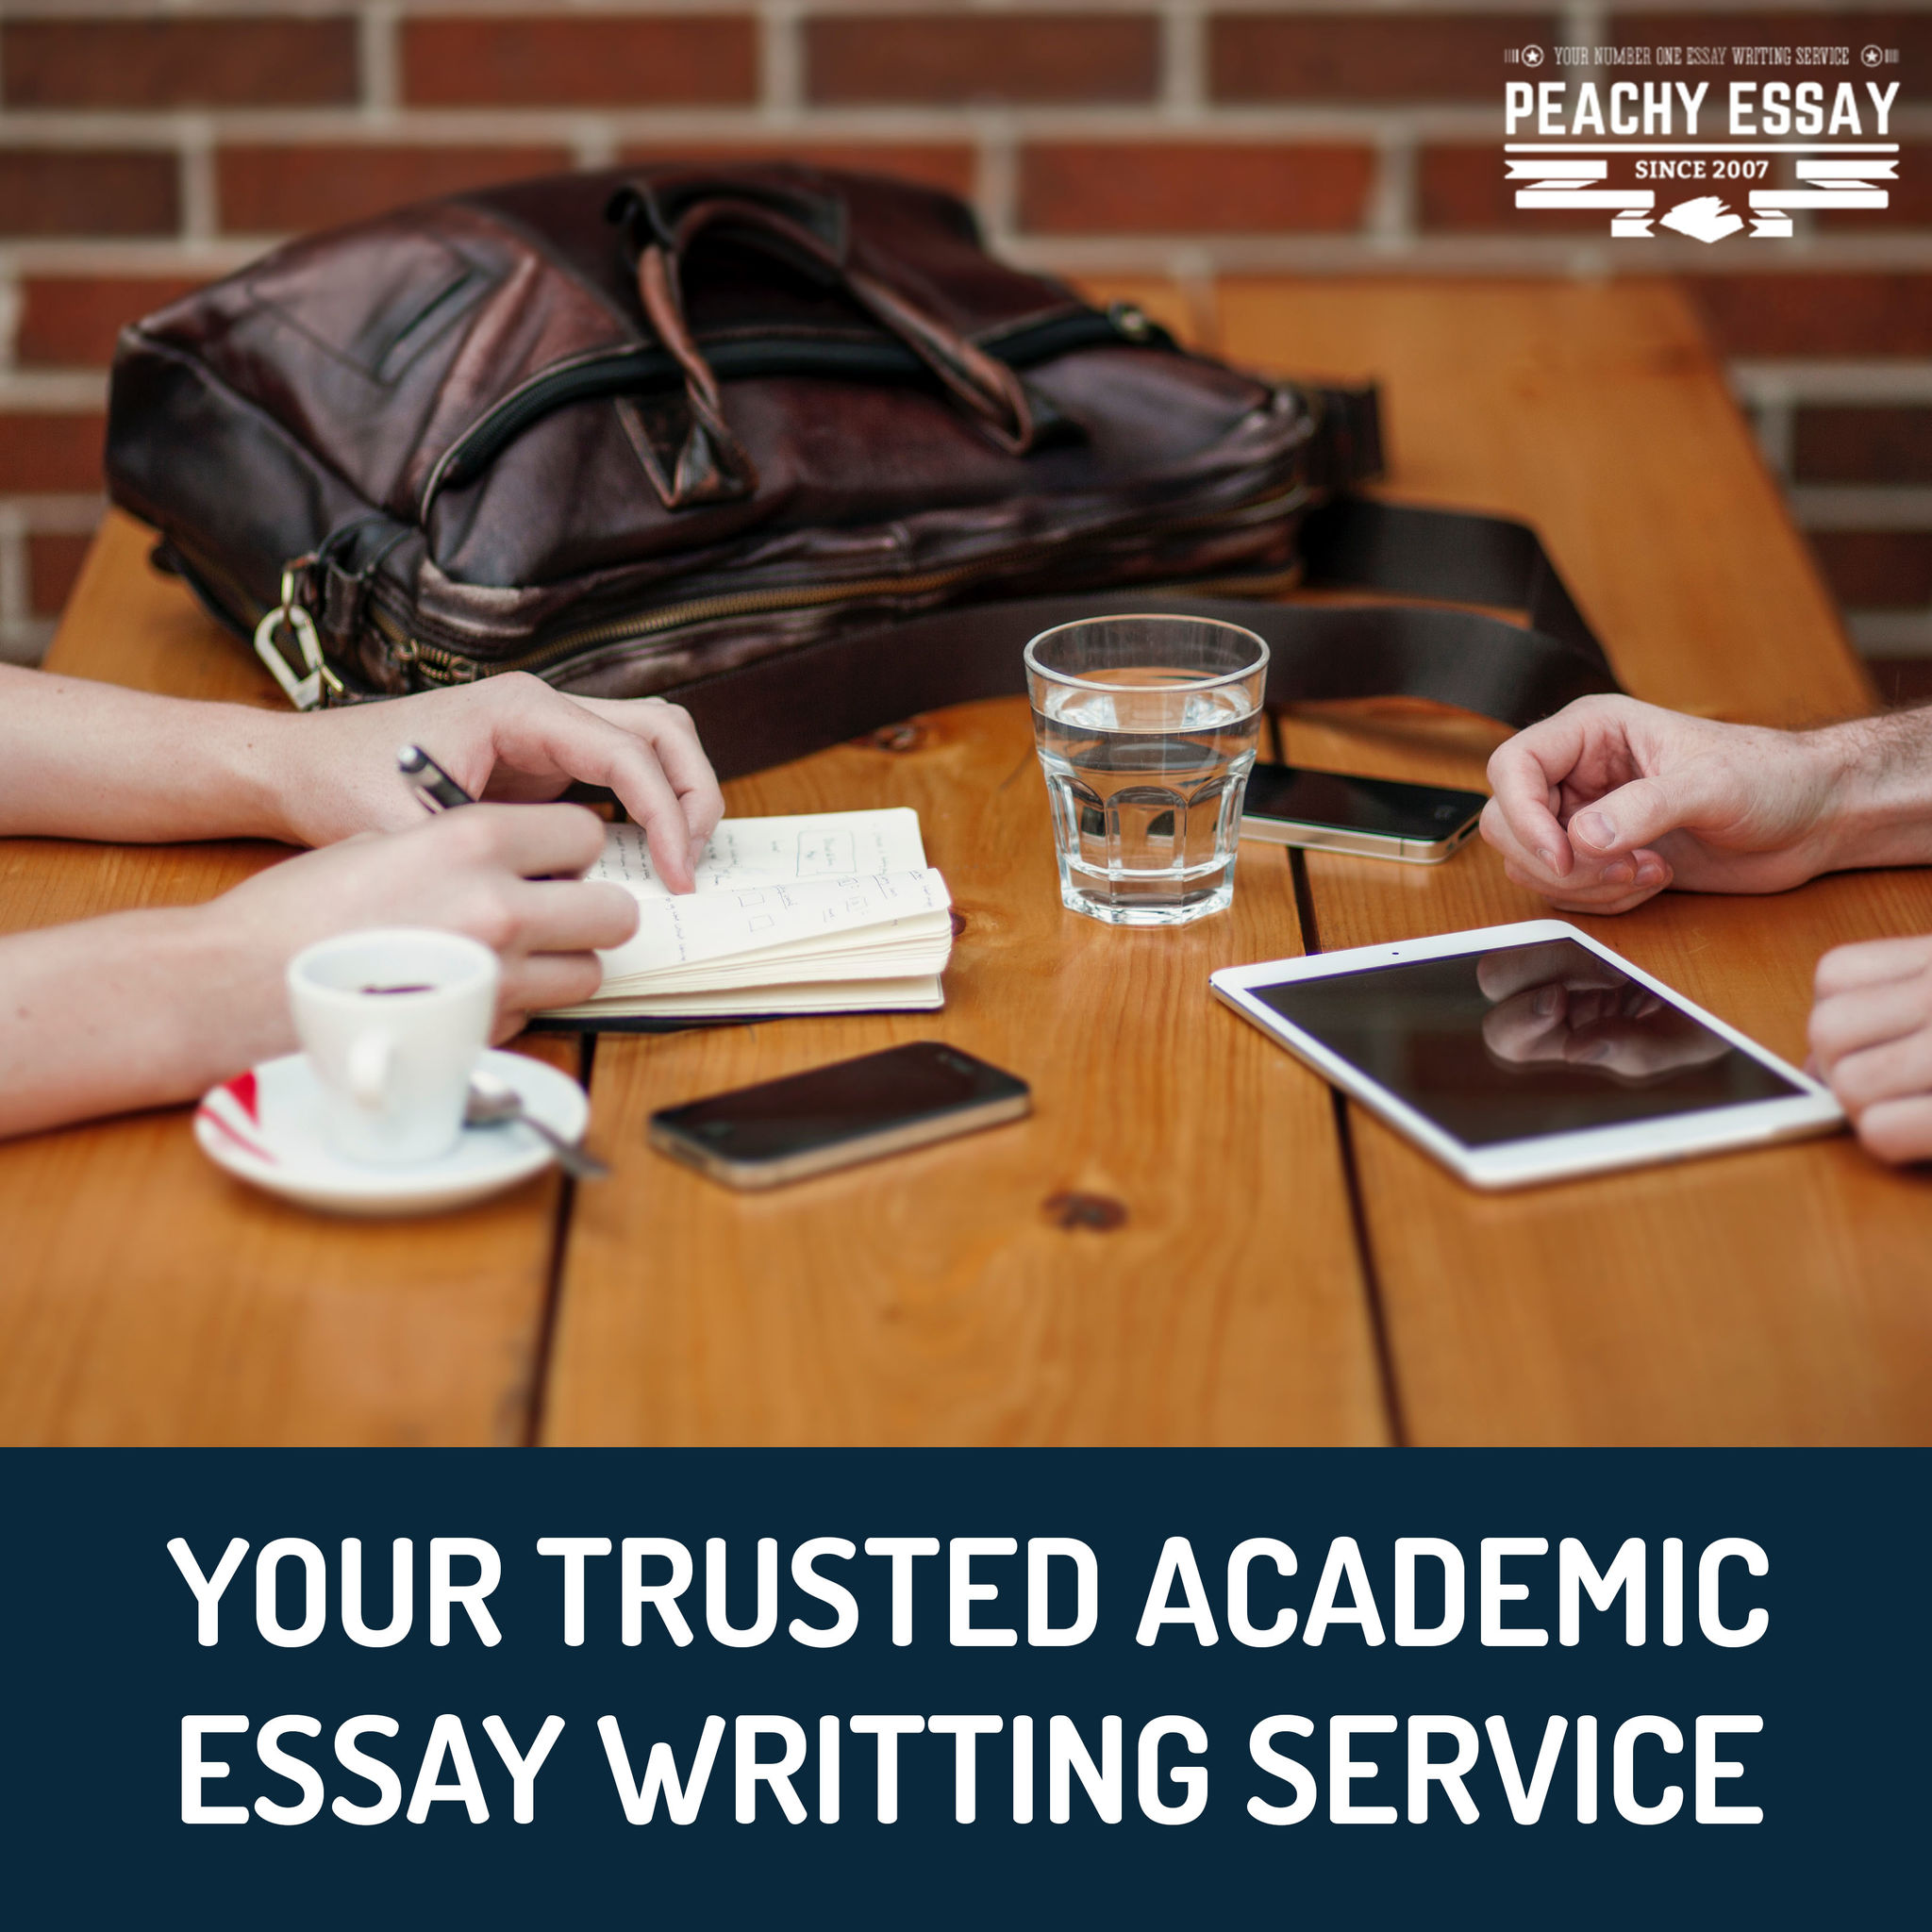 YOUR NUMBER ONE ESSAY WRITING SERVICE